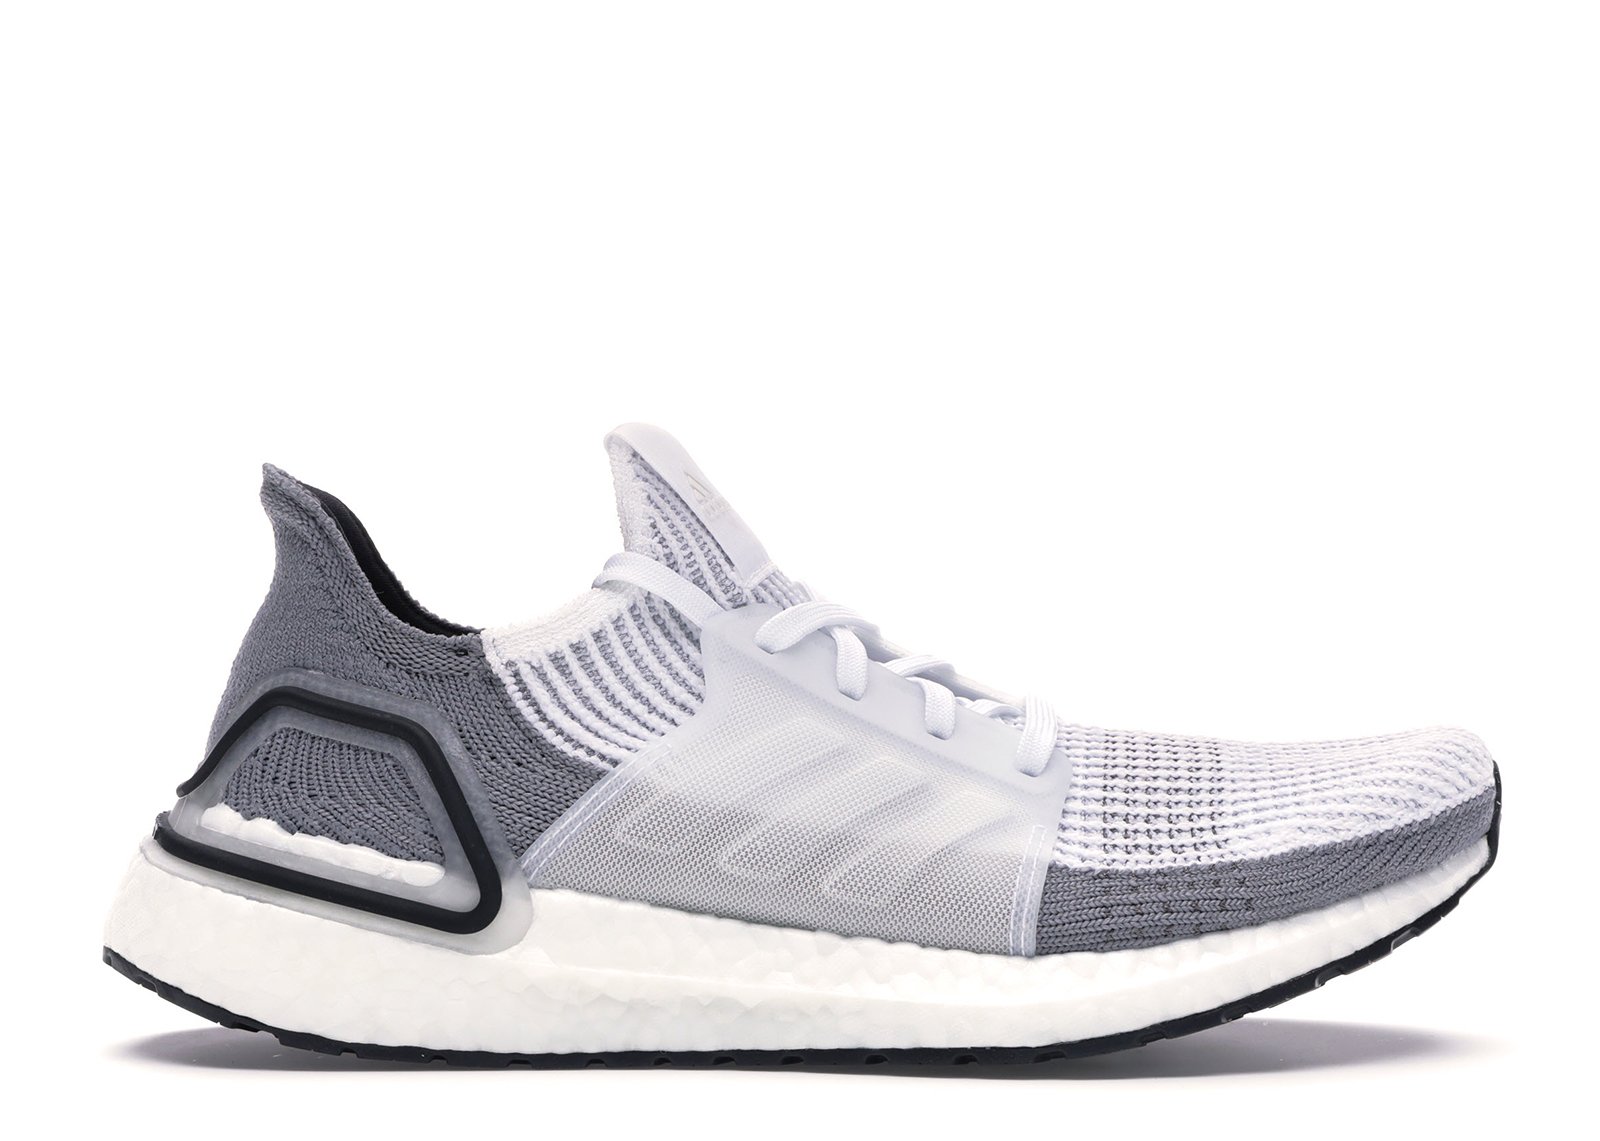 white ultra boost womens size 8